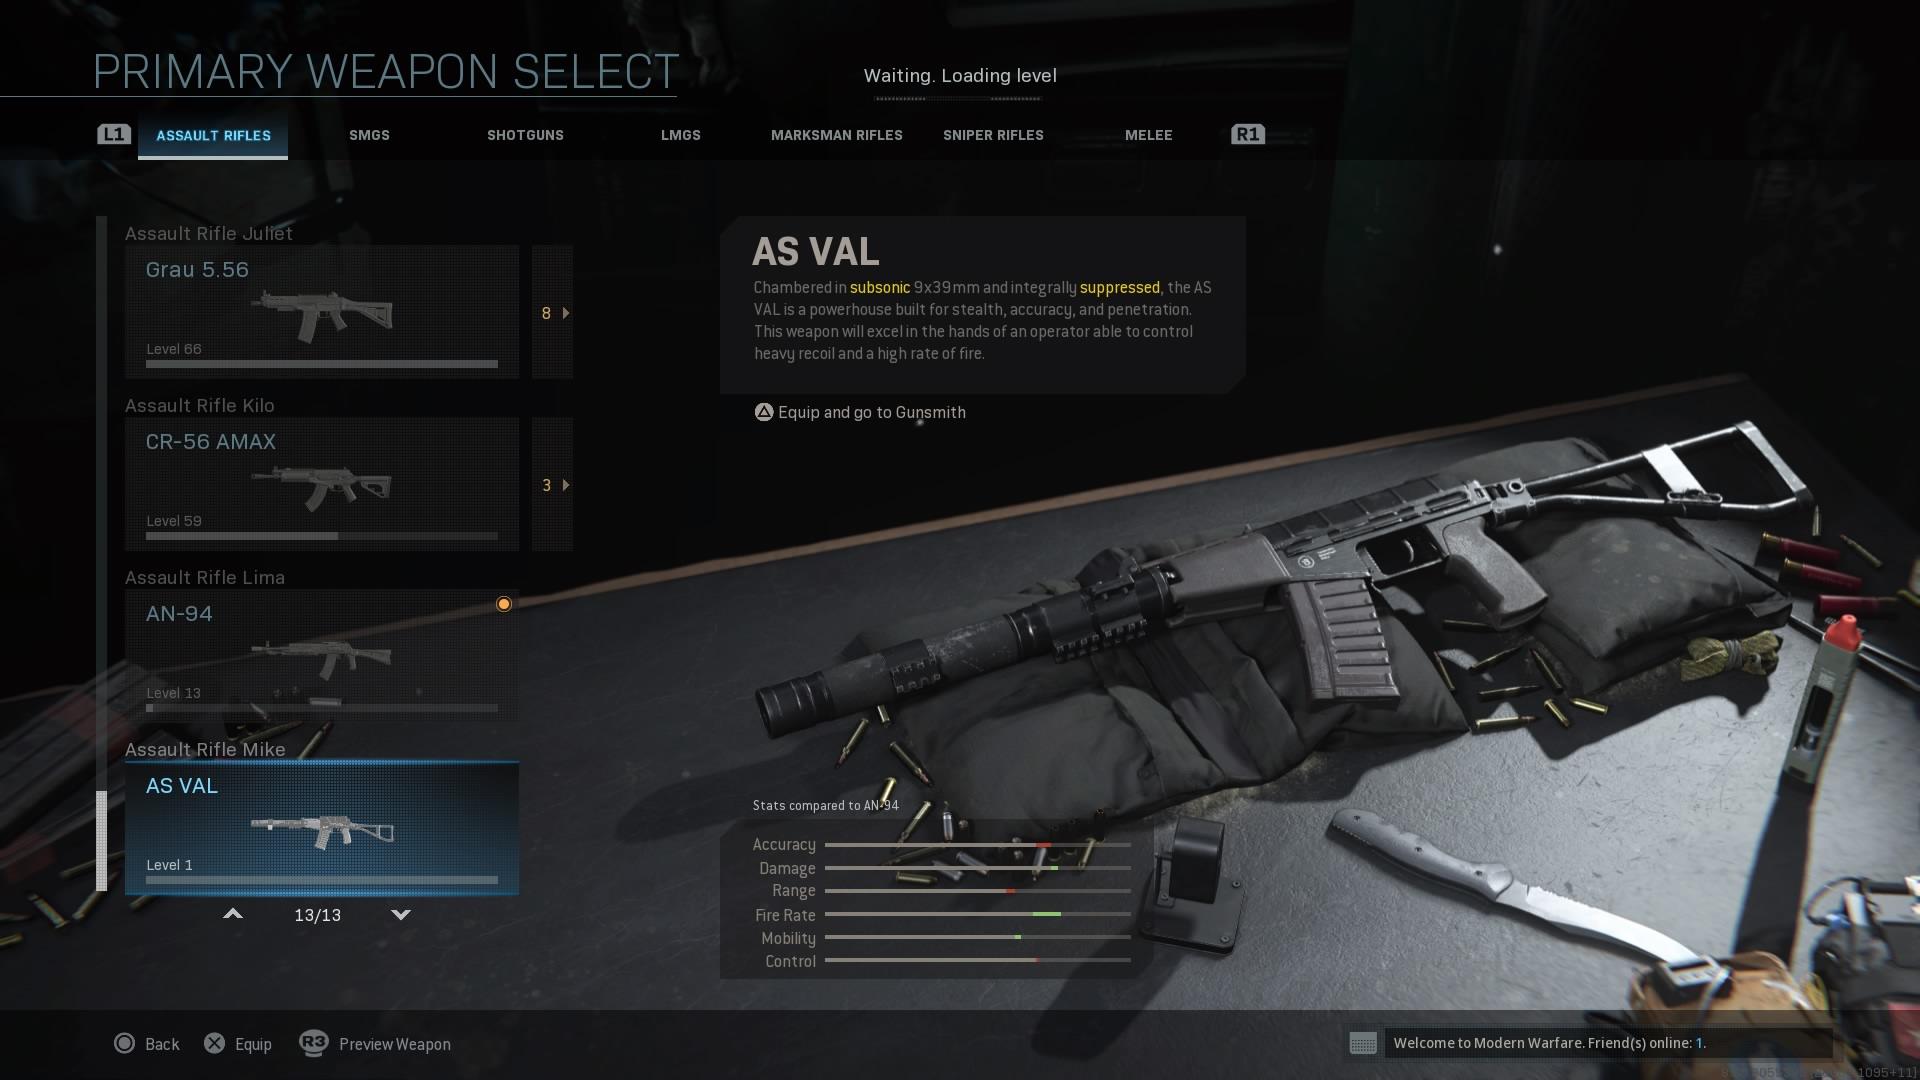 The AS VAL assault rifle as it appears in the Modern Warfare armory.